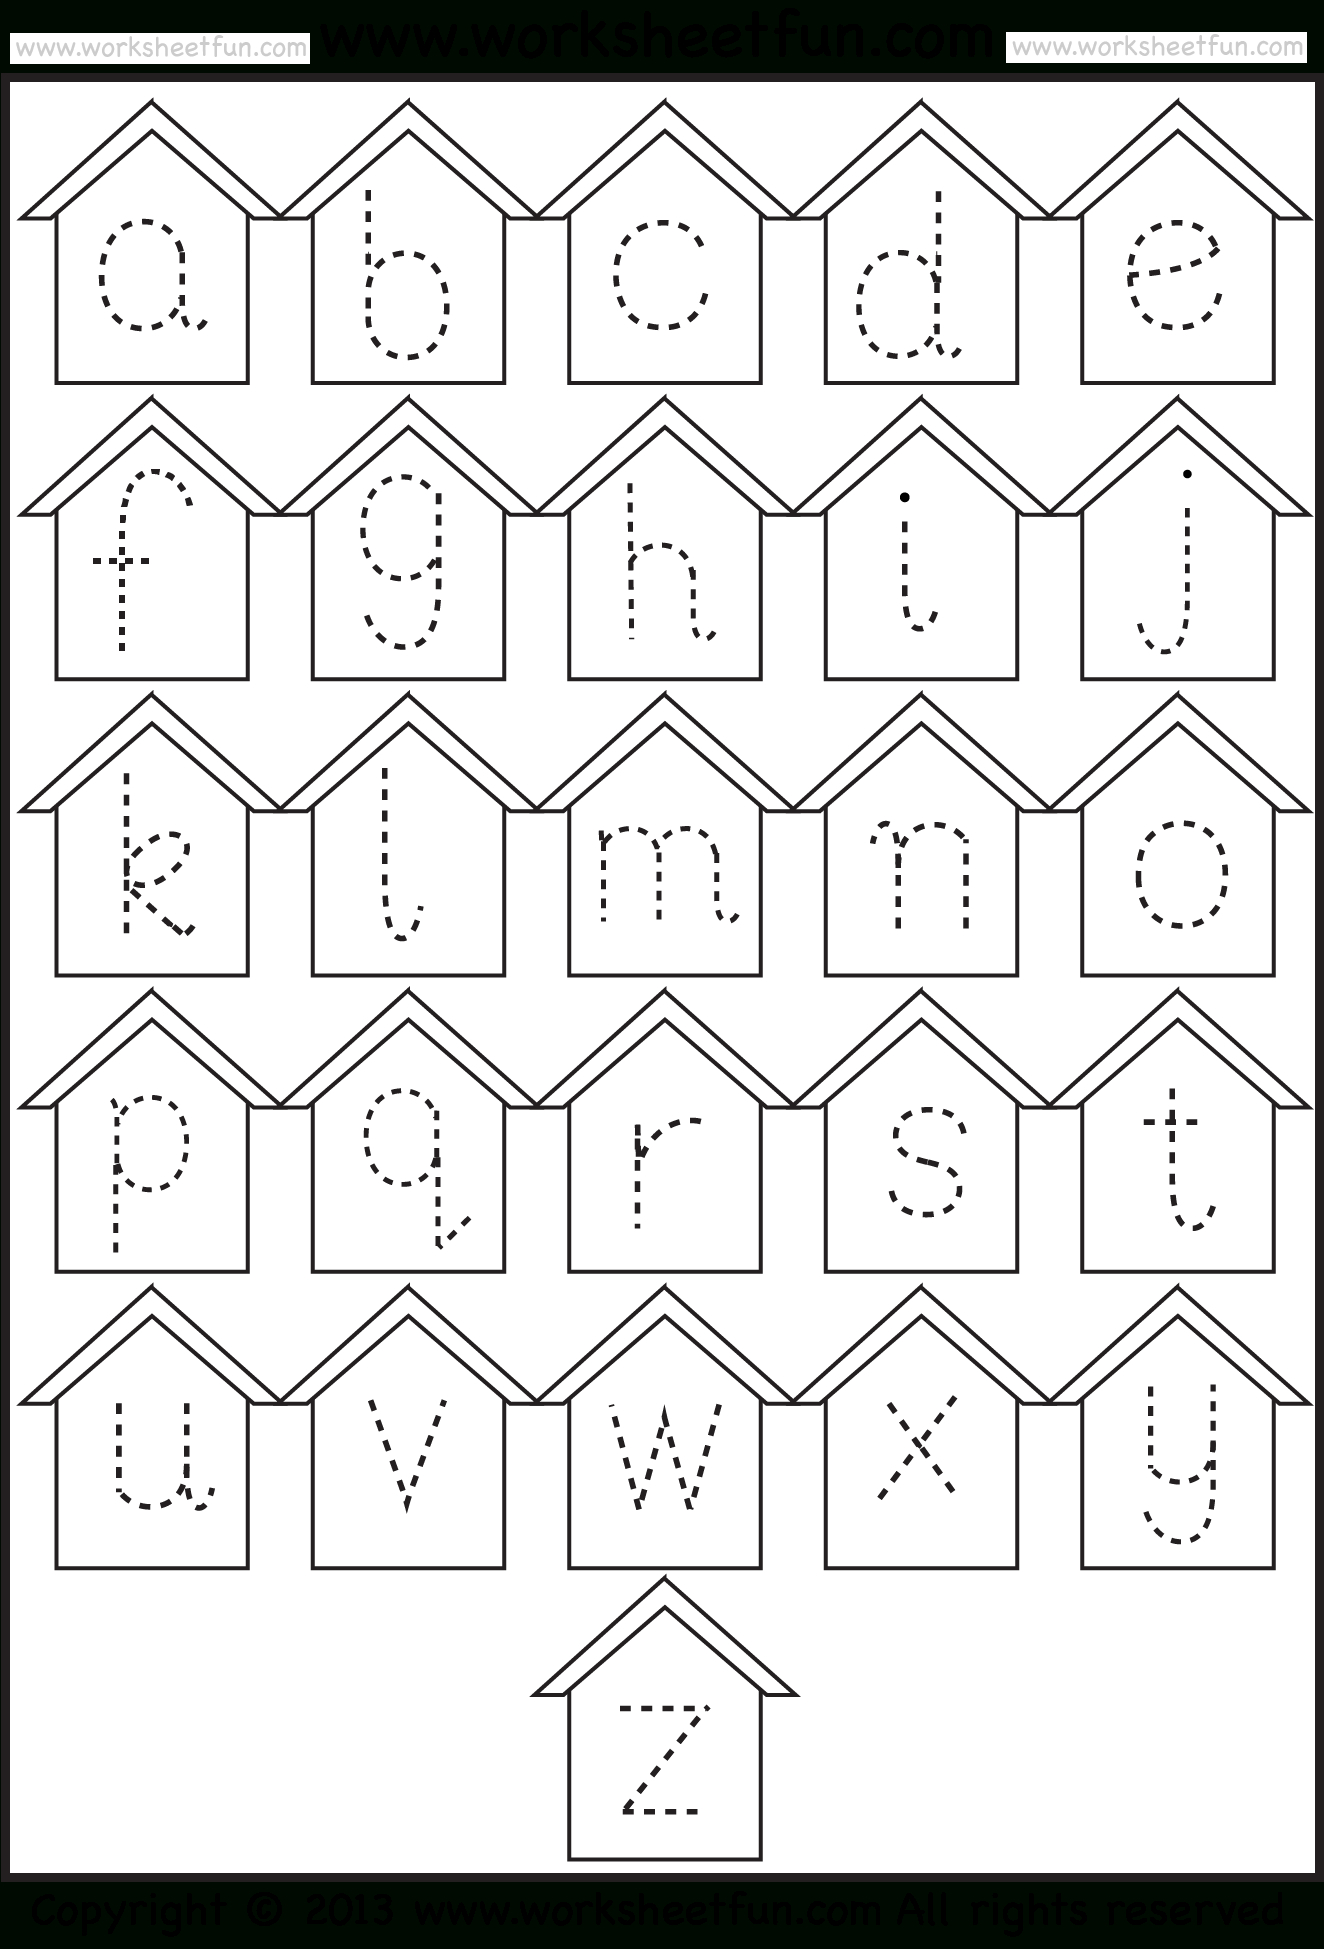 tracing-lowercase-alphabet-worksheets-alphabet-tracing-worksheets